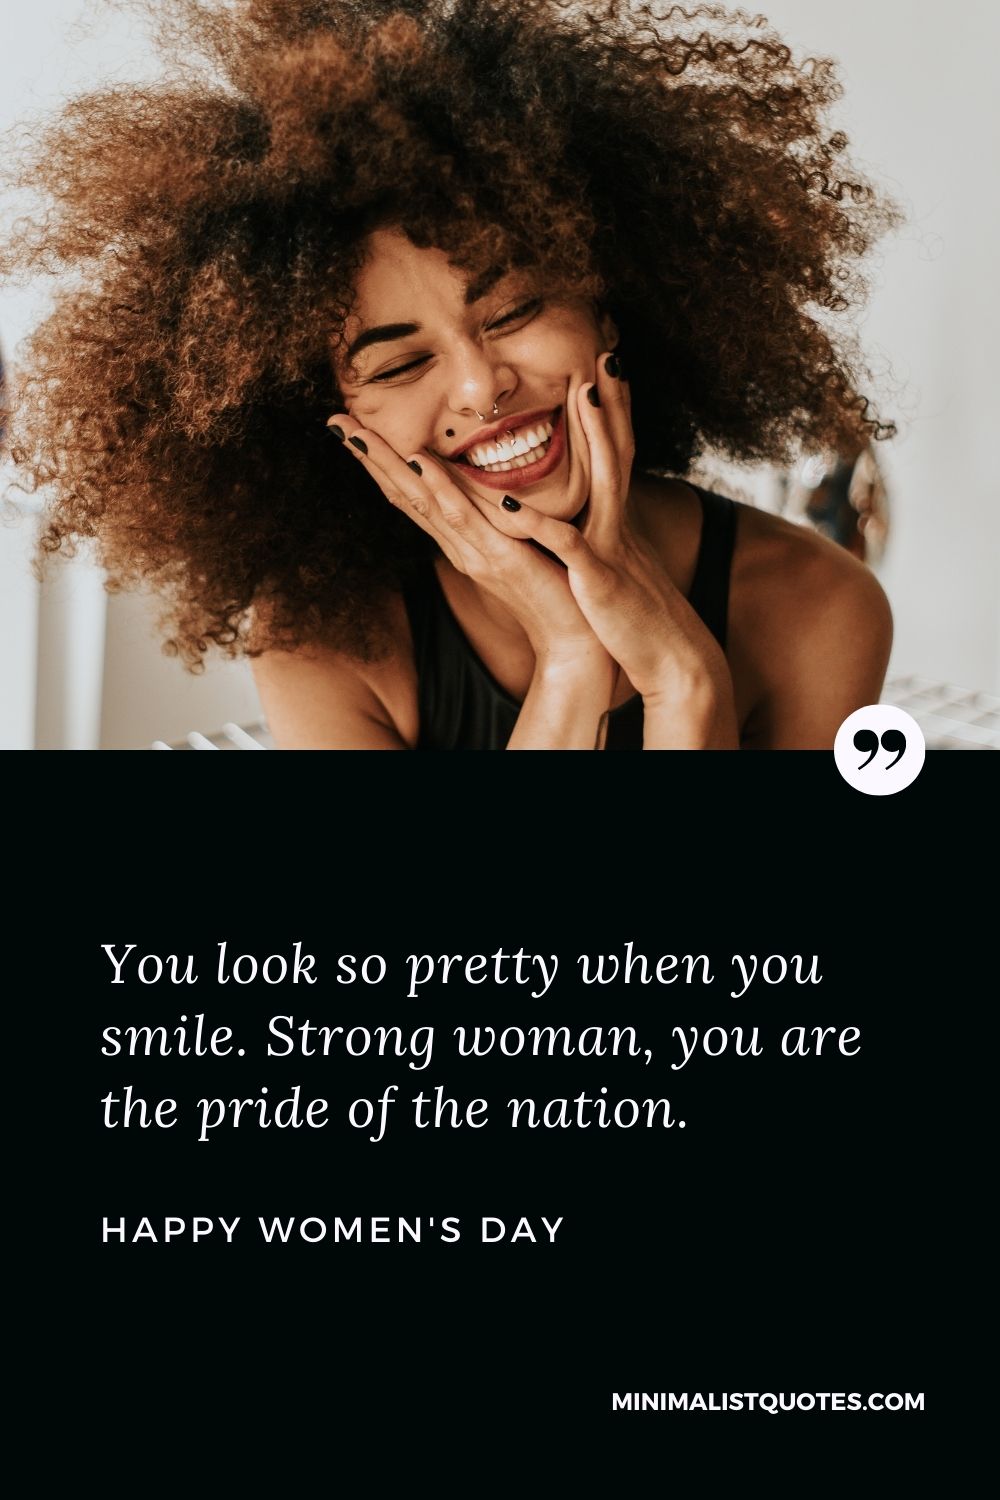 Women's Day Wish & Message: You look so pretty when you smile. Strong woman, you are the pride of the nation.